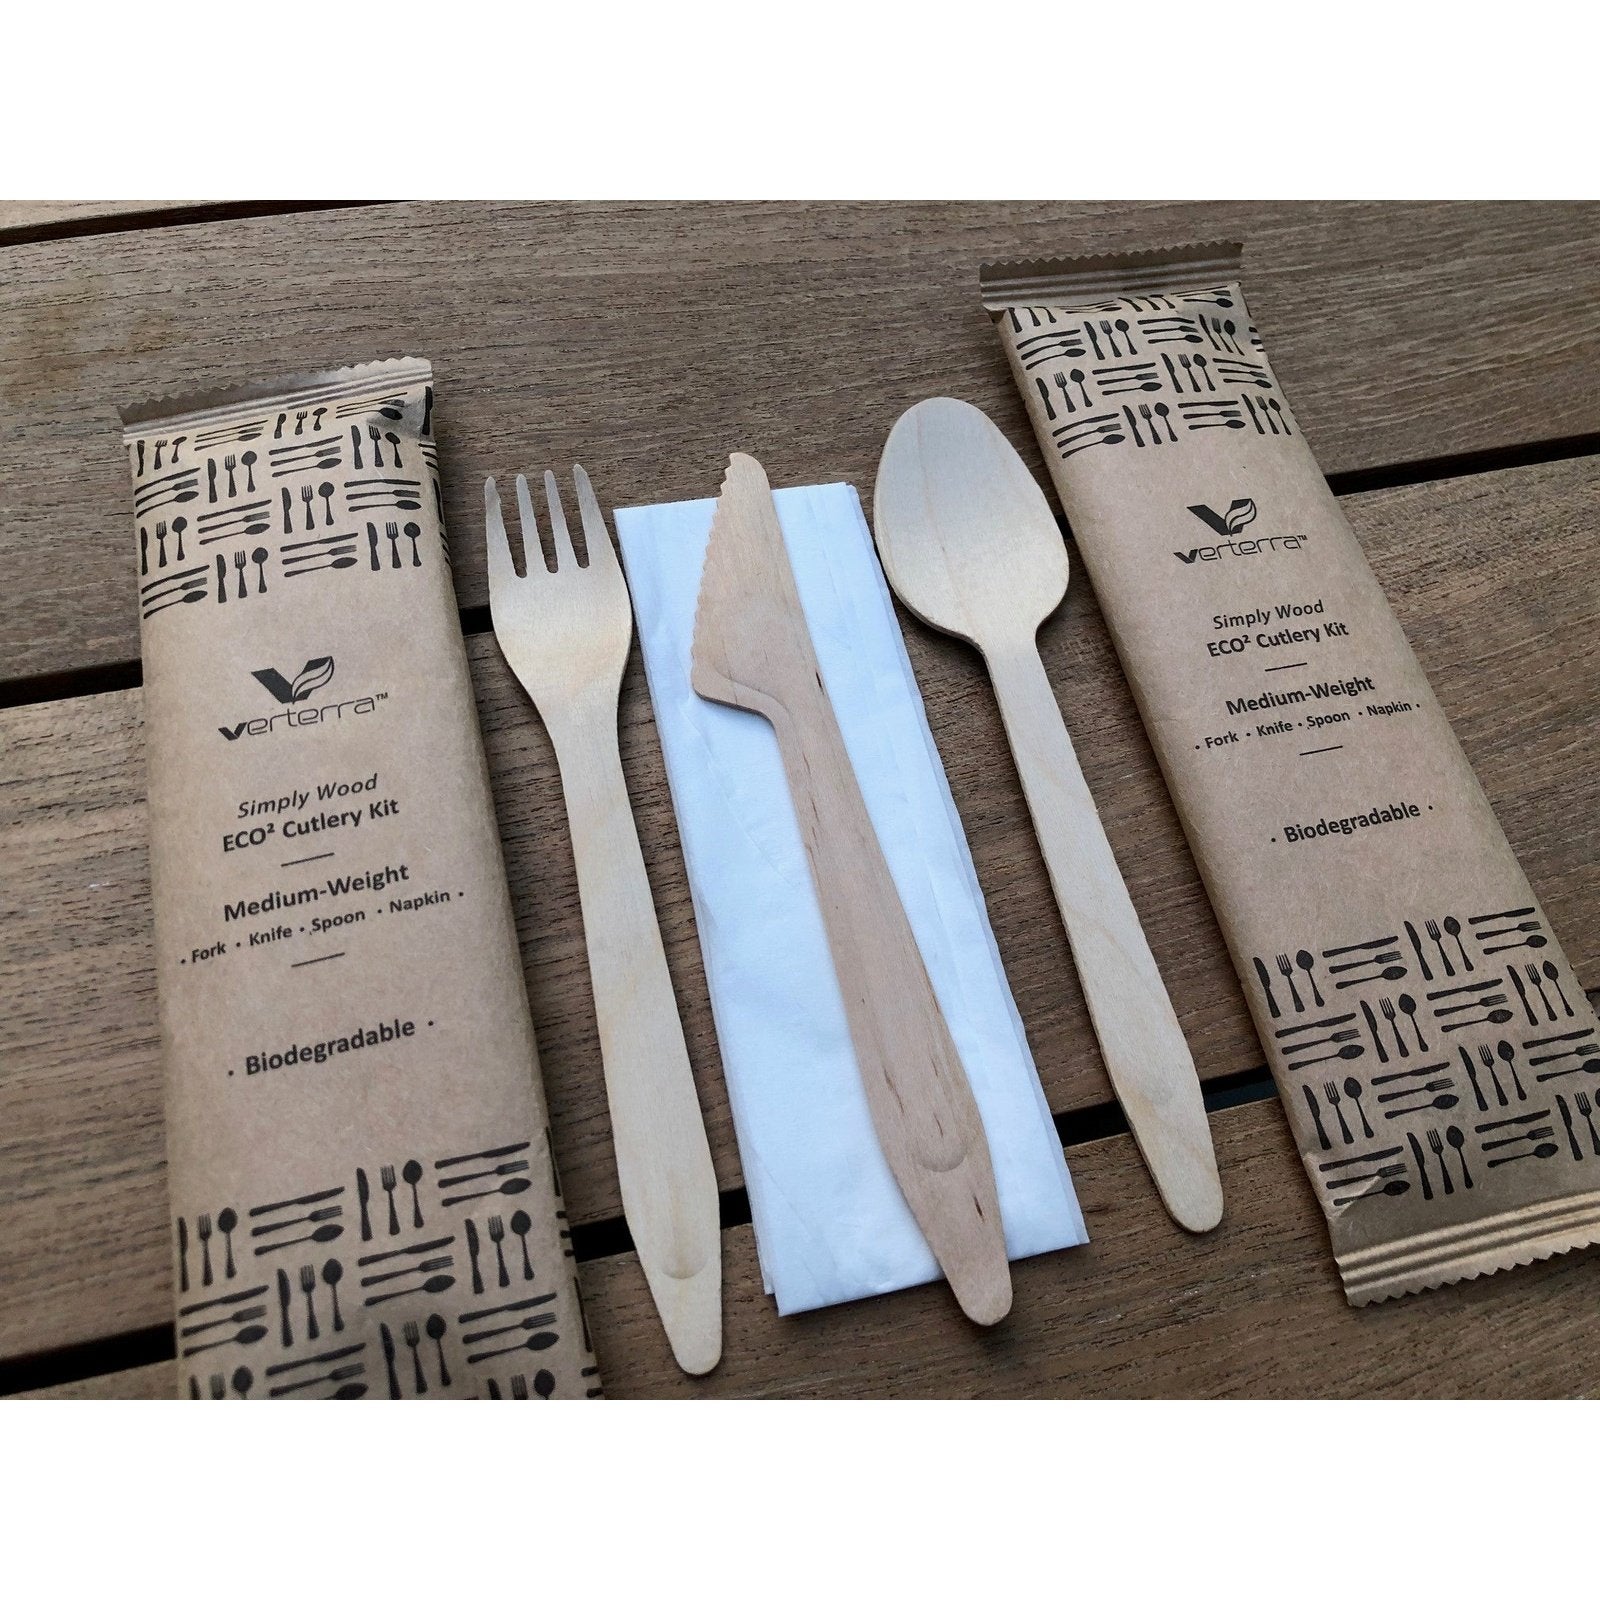 Shop For Wholesale plastic plating kit And Spend Less 